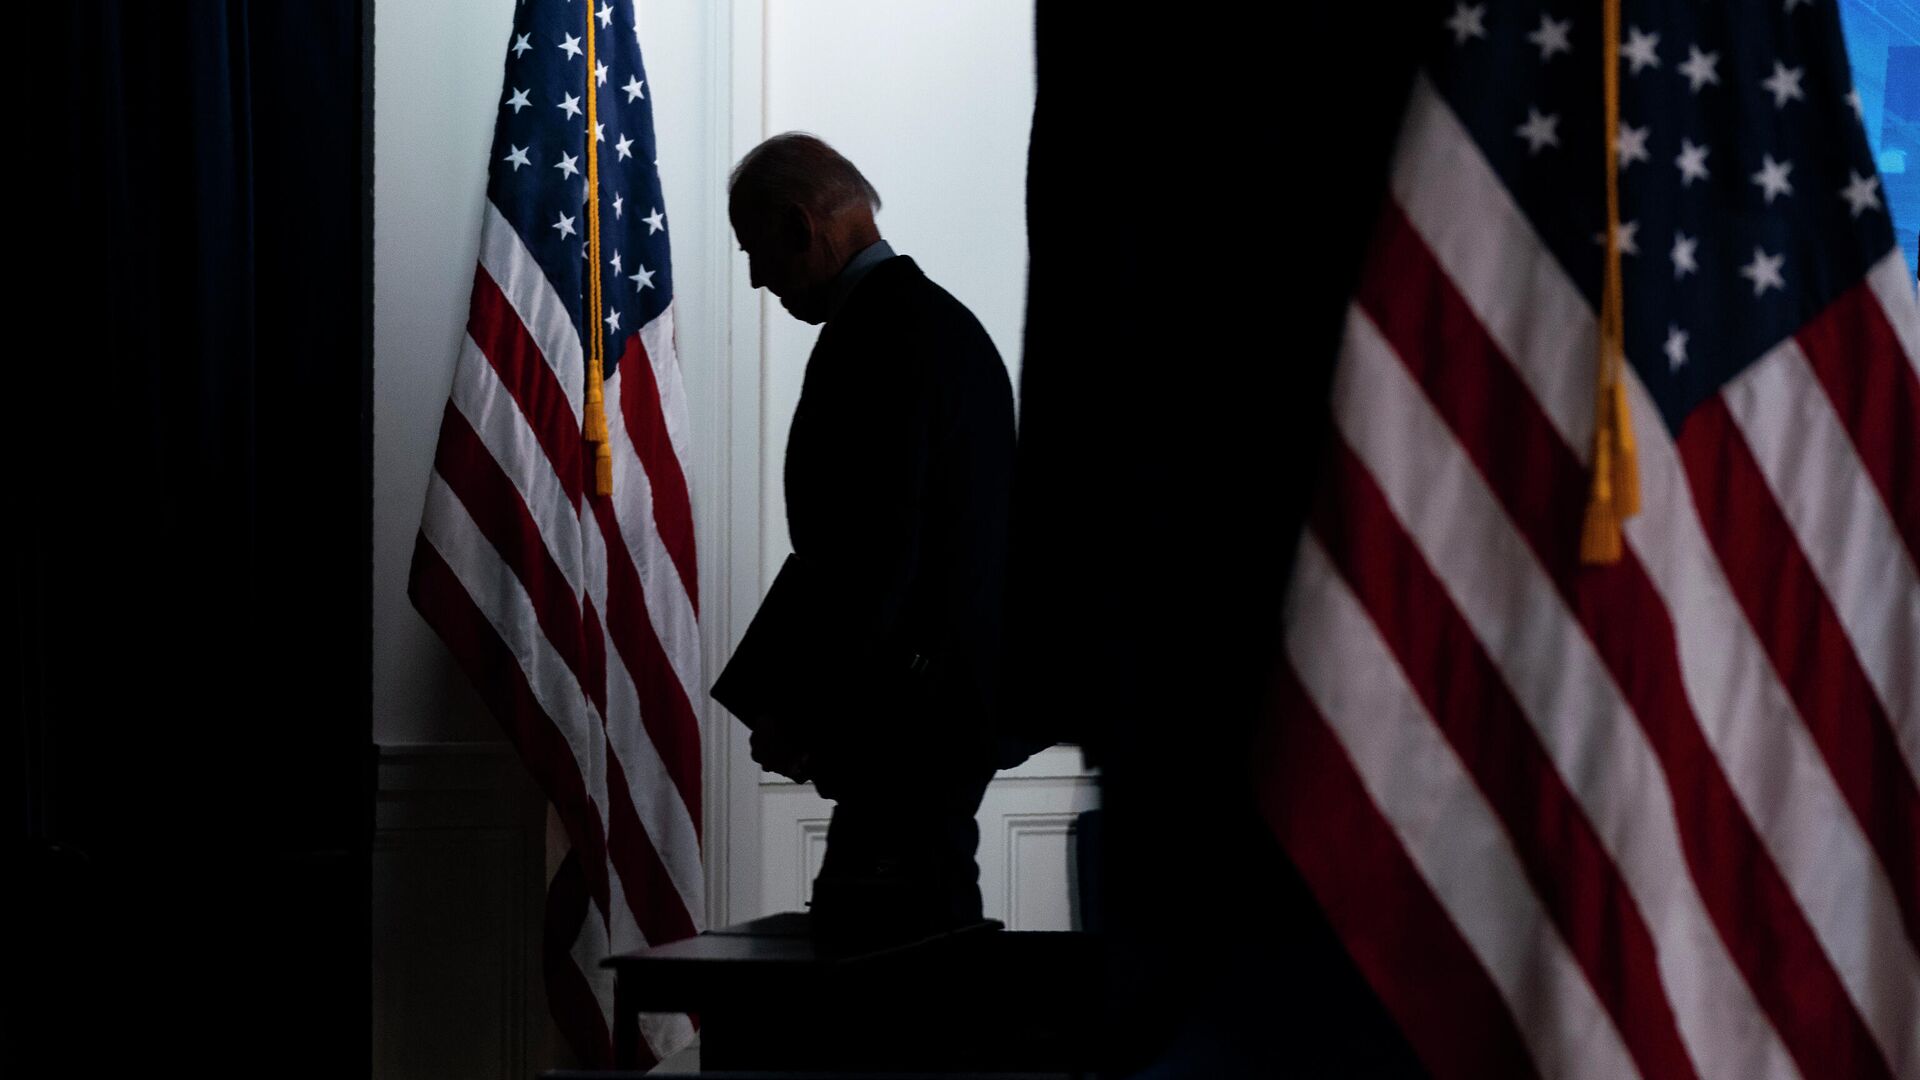 President Joe Biden walks away after speaking about COVID-19 vaccinations at the White House, Wednesday, April 21, 2021, in Washington - Sputnik International, 1920, 01.07.2022